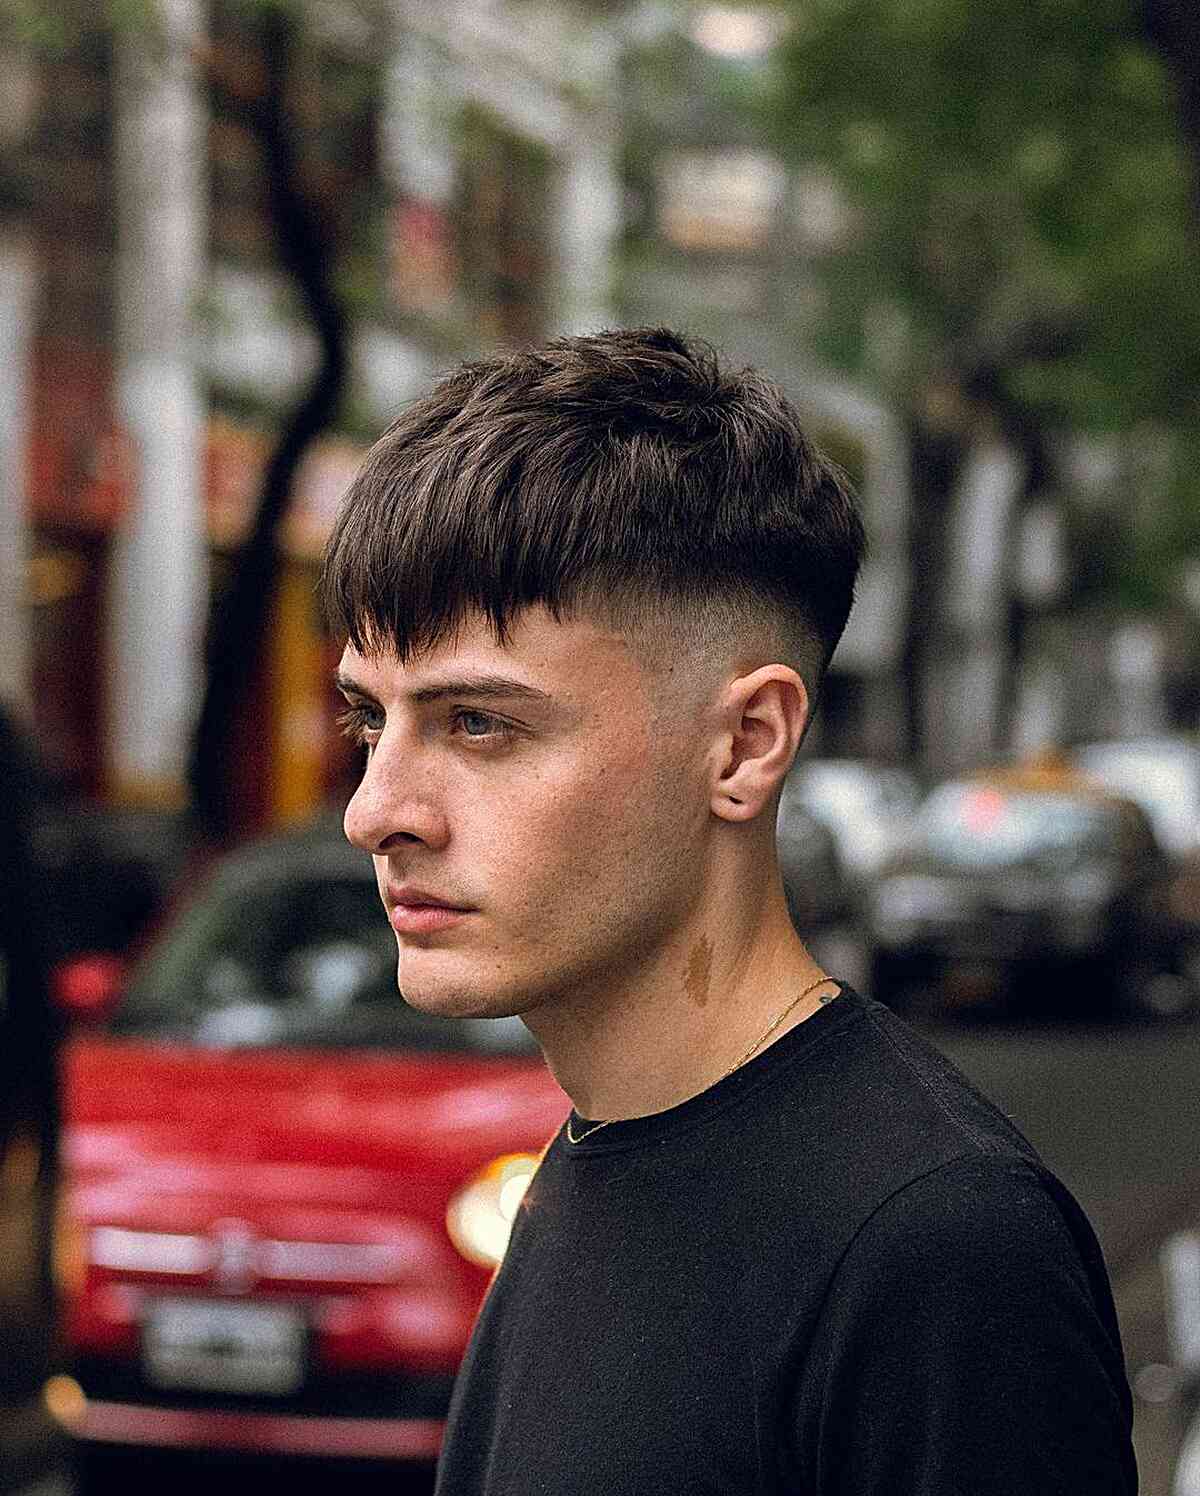 Short French Crop with Choppy Layers and Bangs for Young Men